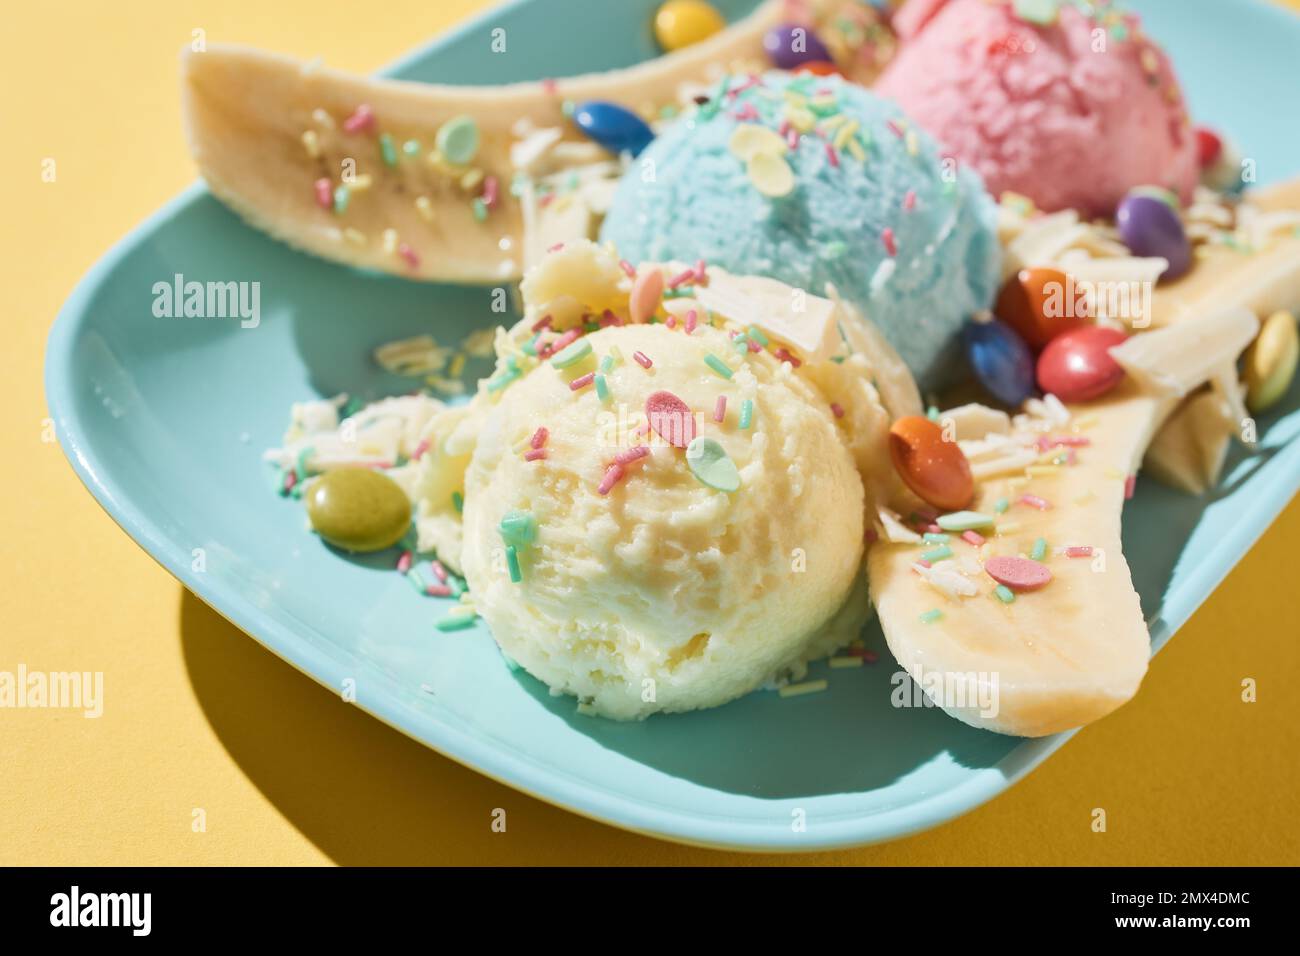 From above closeup of plate with banana split dessert with ice cream balls decorated with colorful dragee and sprinkles on yellow background Stock Photo